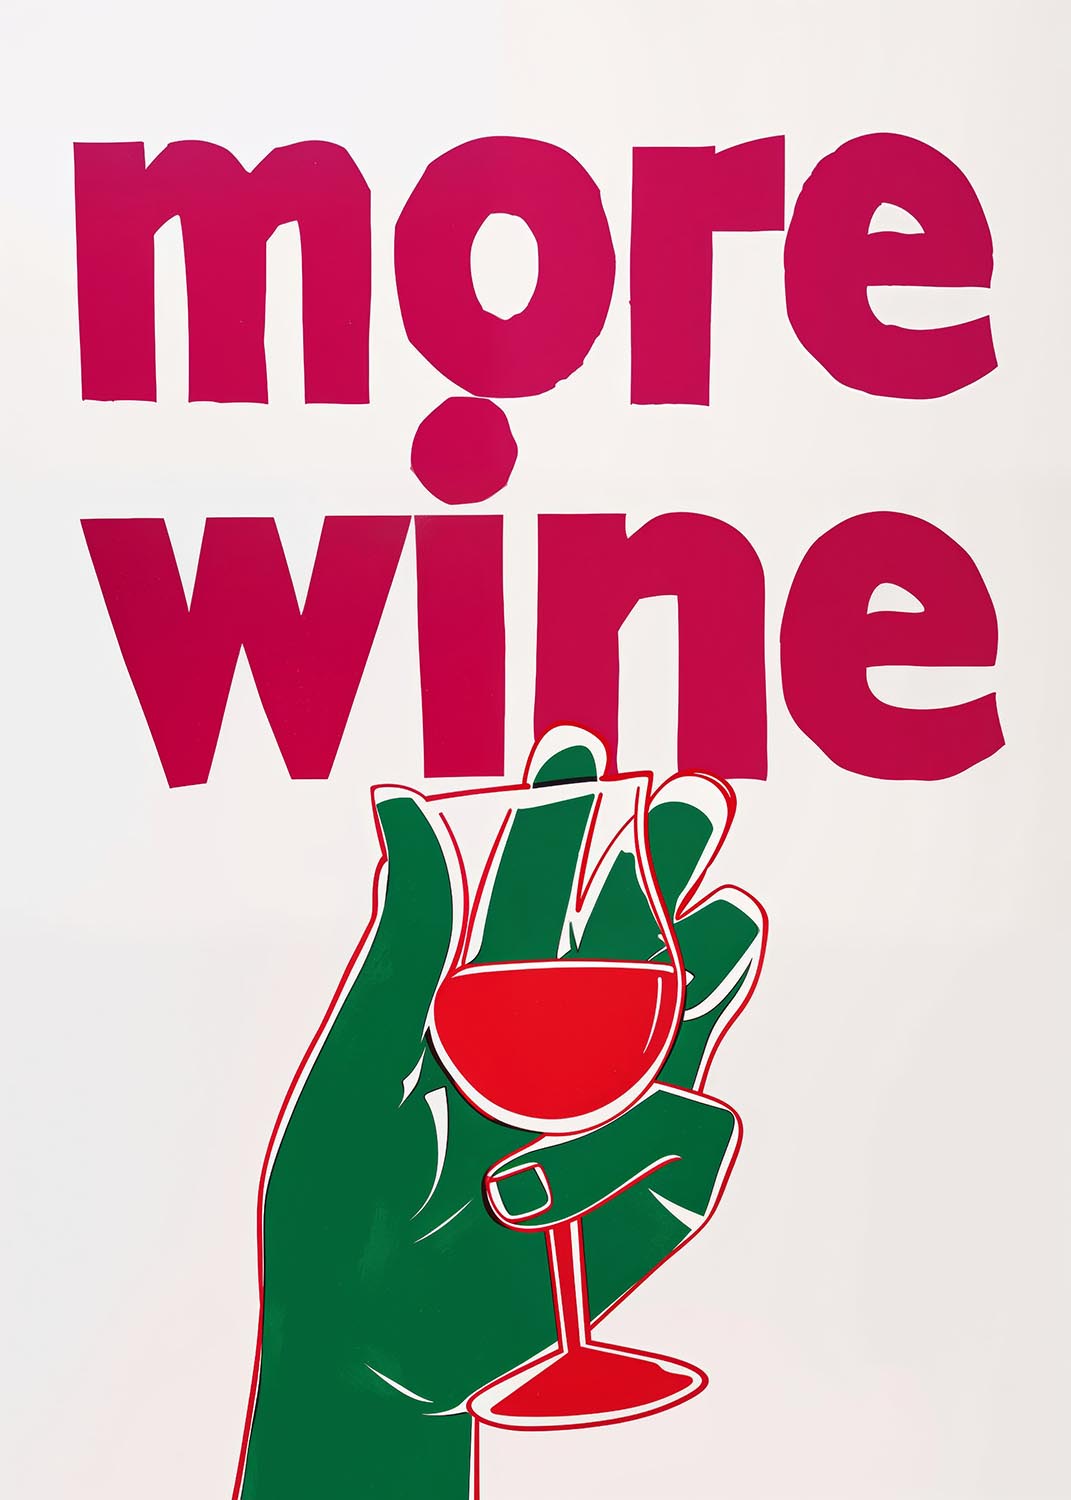 Bold magenta 'More Wine' text with playful hand holding a glass illustration on a white backdrop.